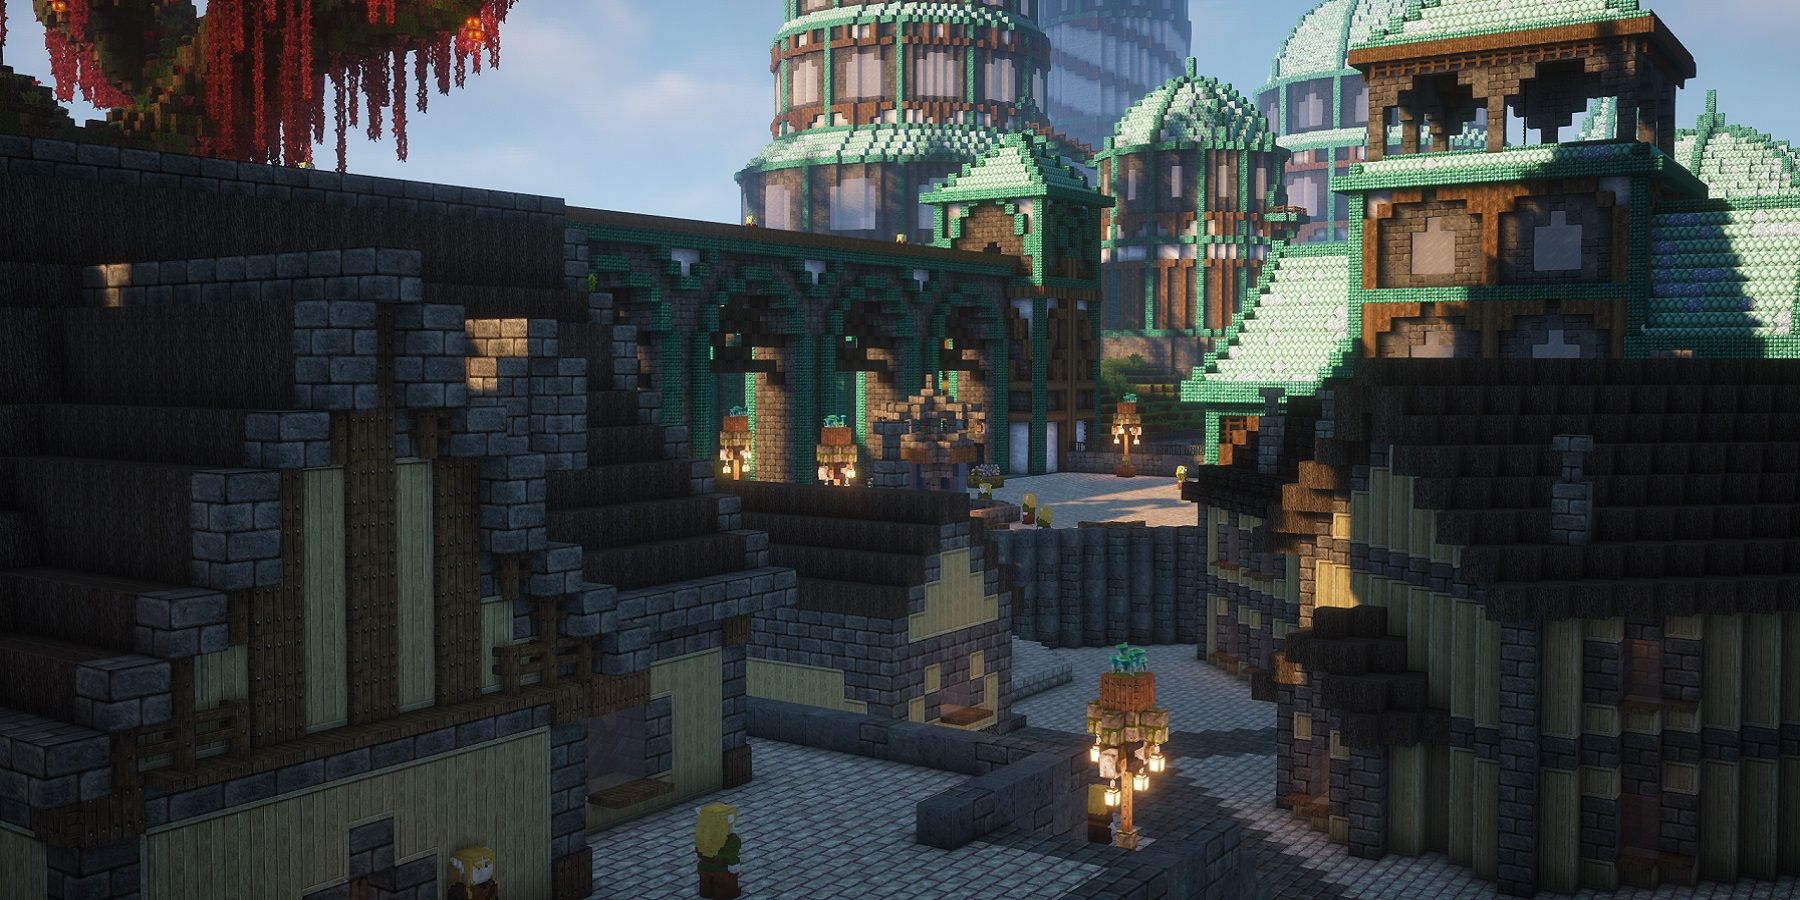 Screenshot from Minecraft showing a city that's being used in the creator's Dungeons & Dragons campaign.